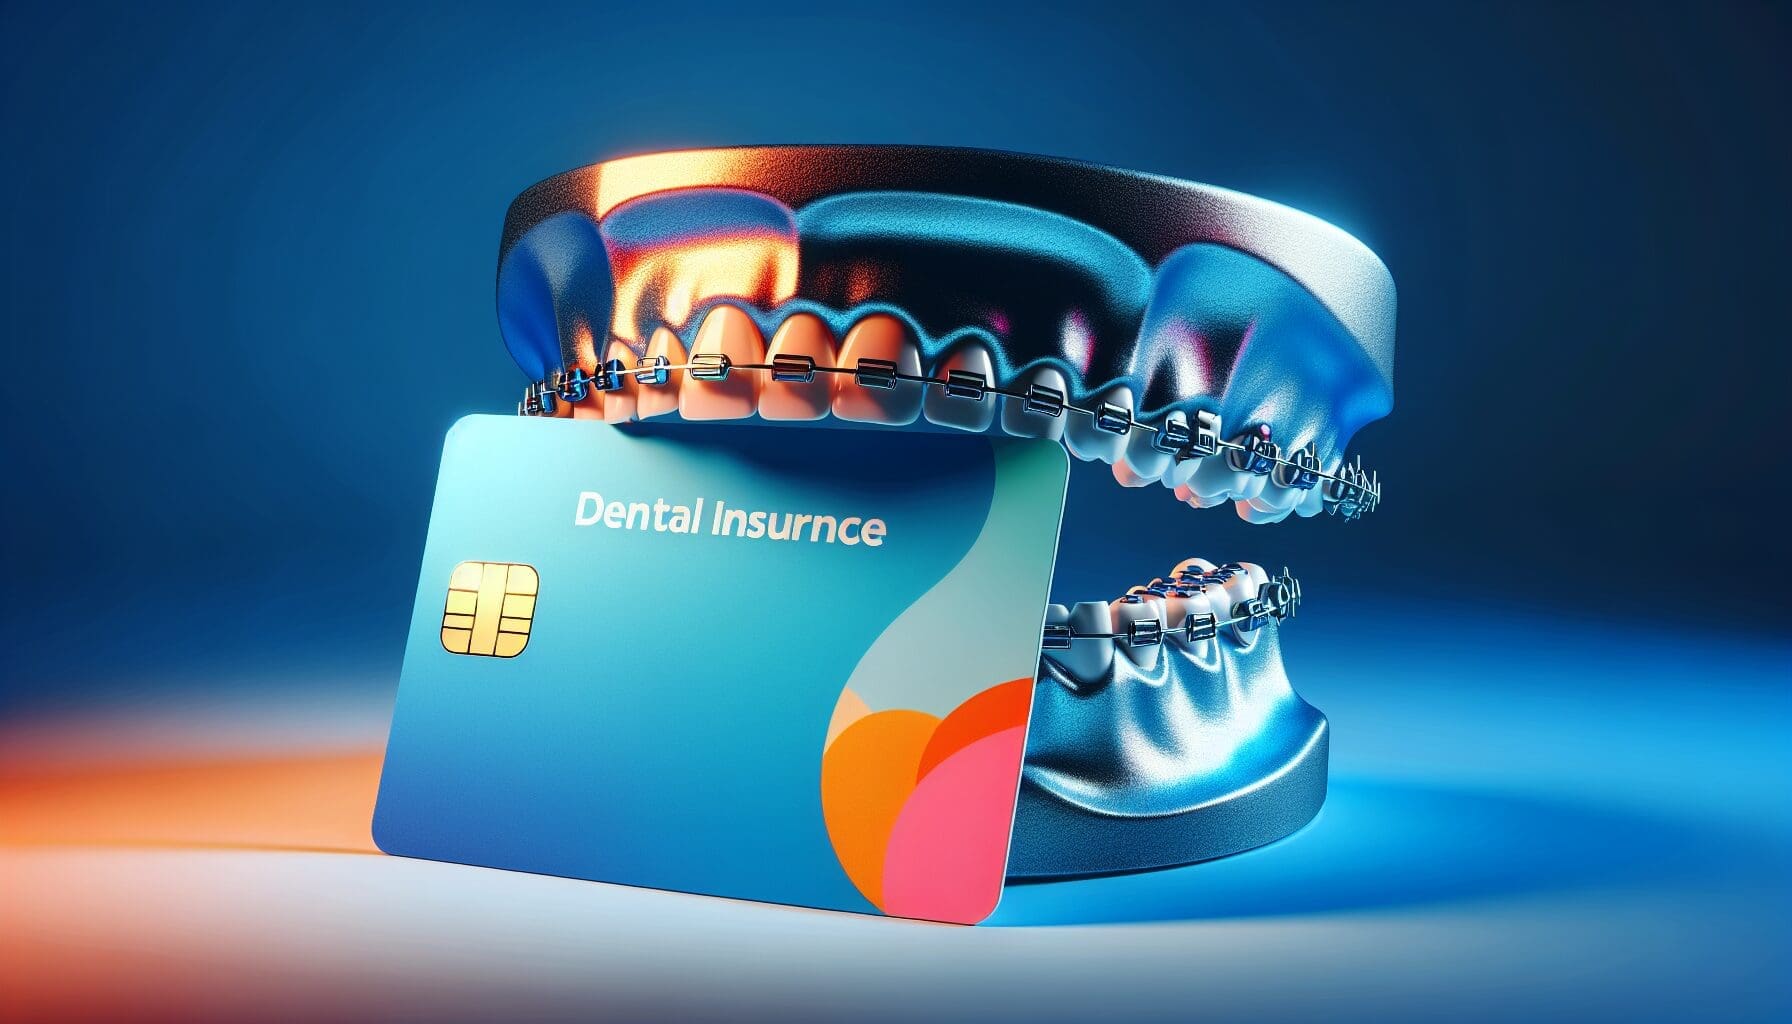 Dental insurance plans and orthodontic braces insurance coverage